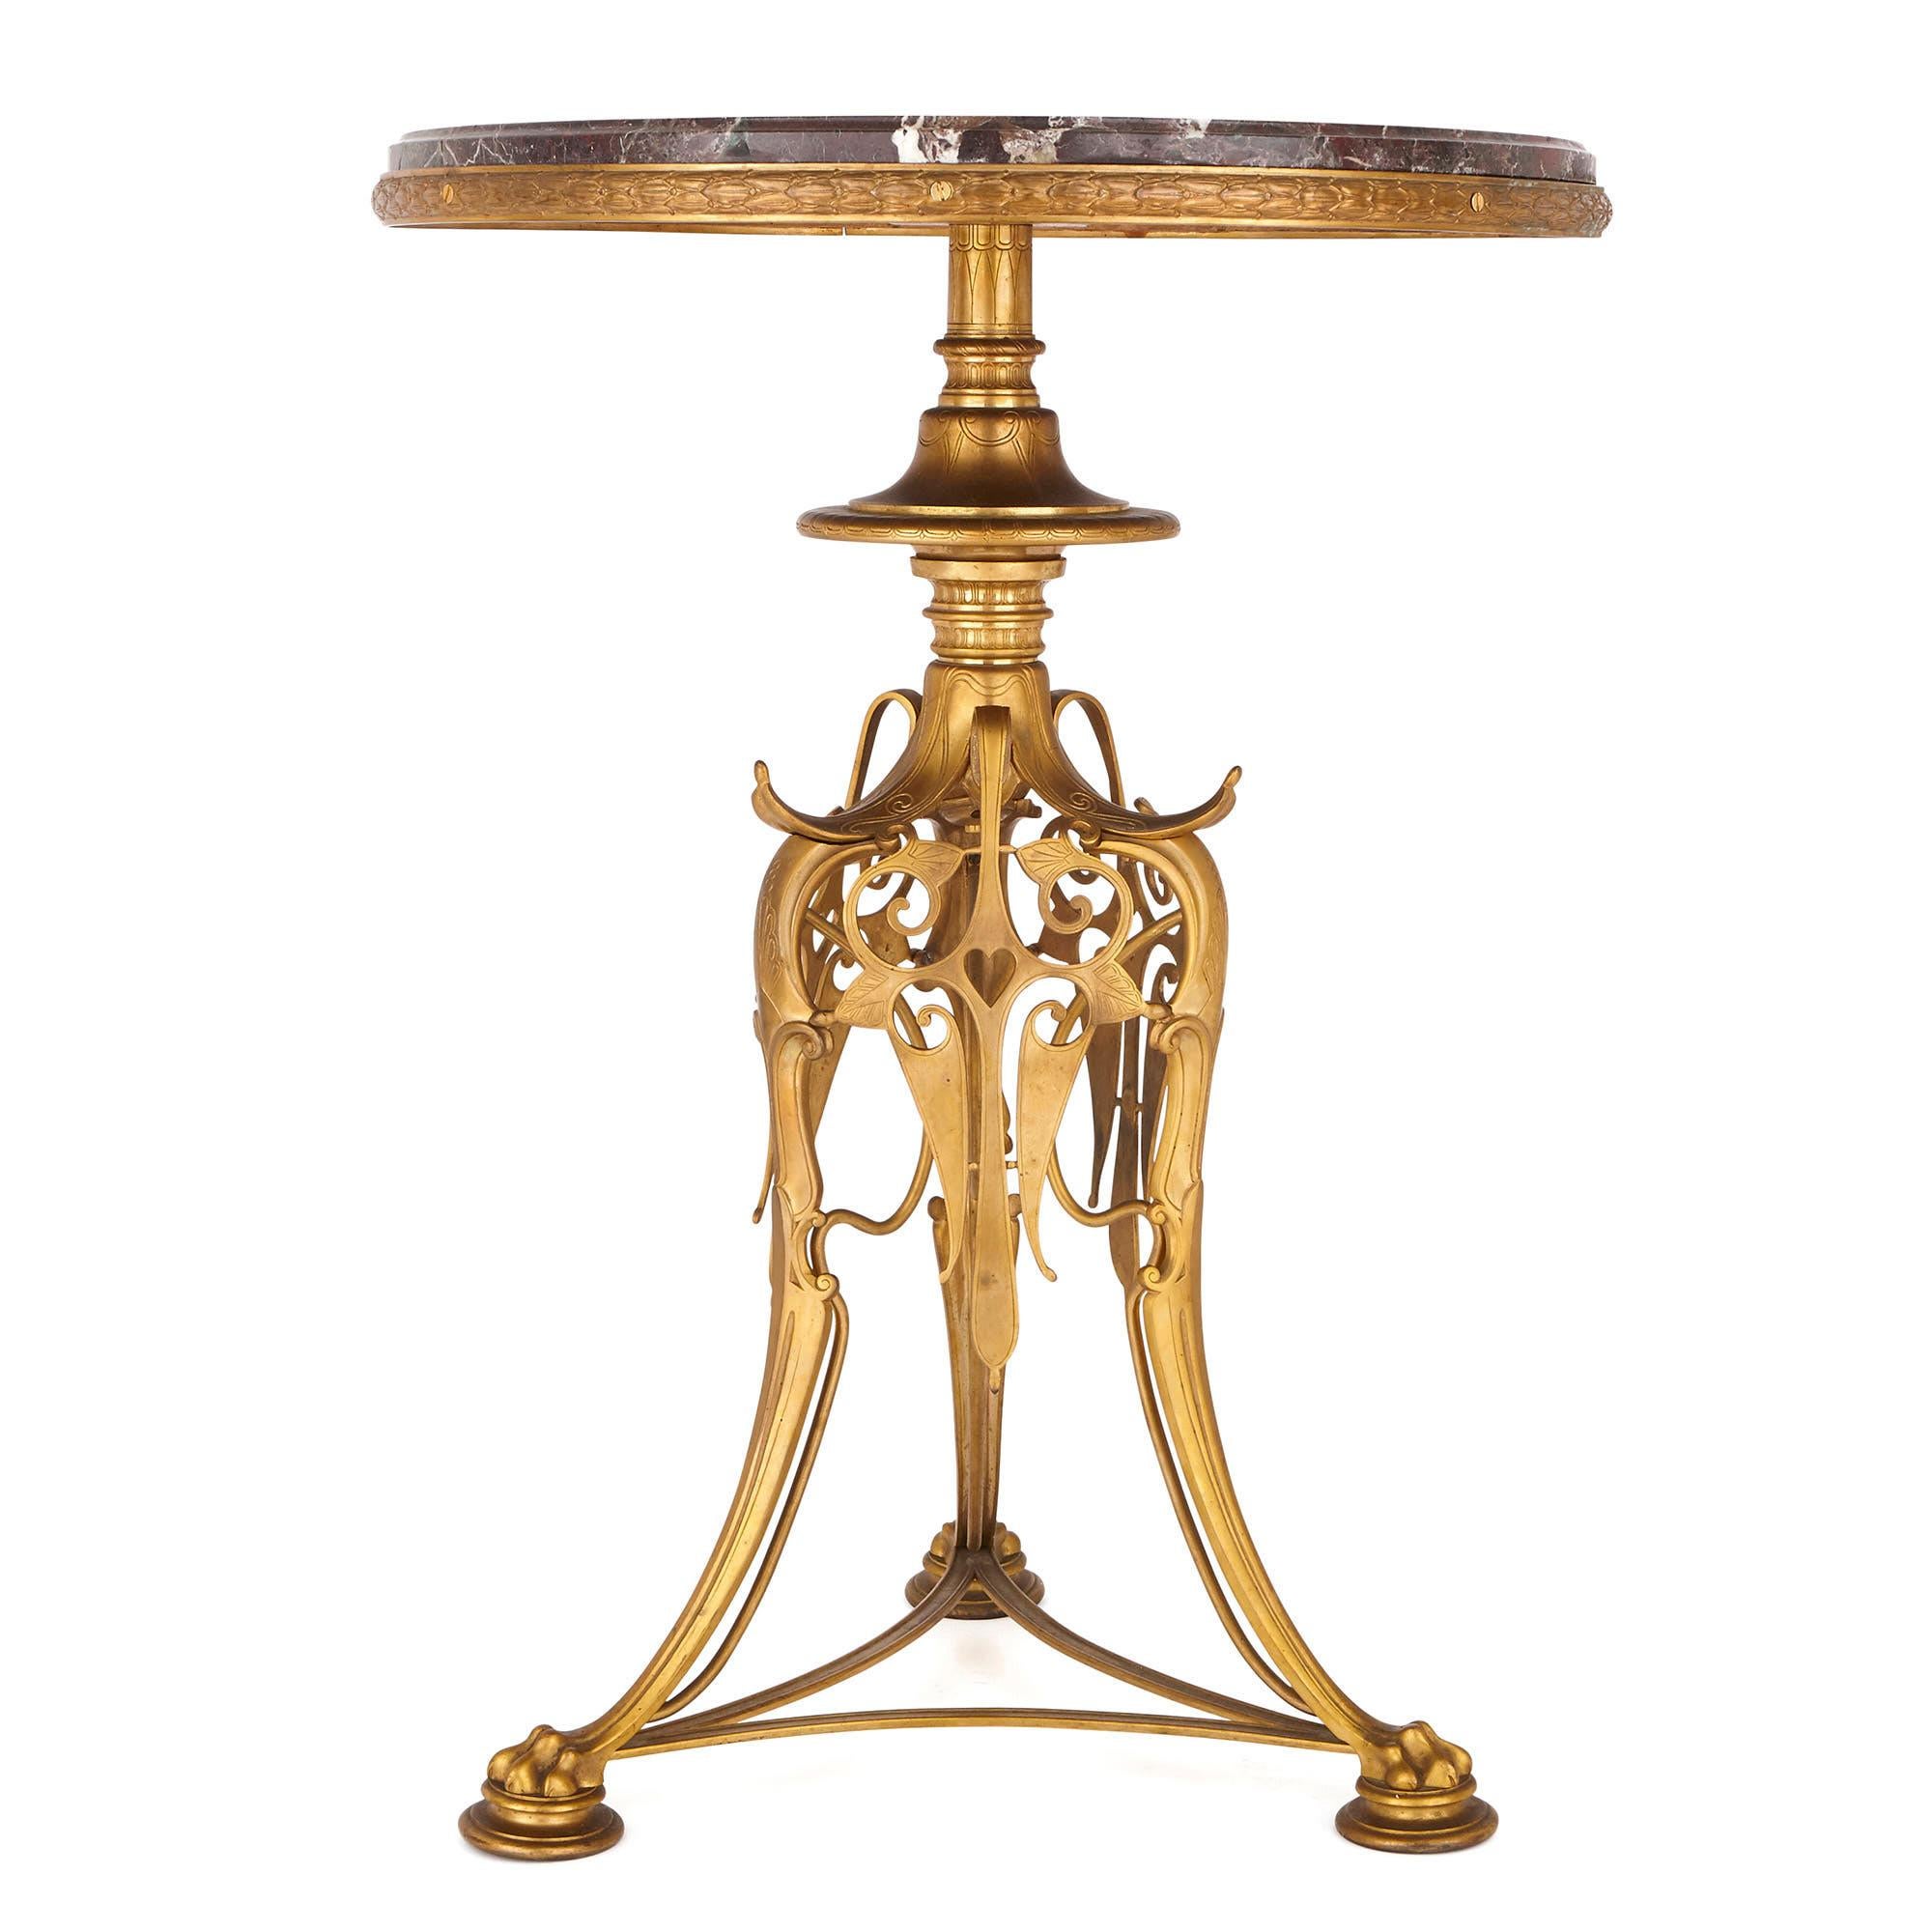 These beautiful and unusual round tables (or guéridons) were crafted by the leading bronze manufacturer of the French Belle Époque, the Barbedienne foundry. Established in 1838, the company specialized in the production of artistic bronzes for an